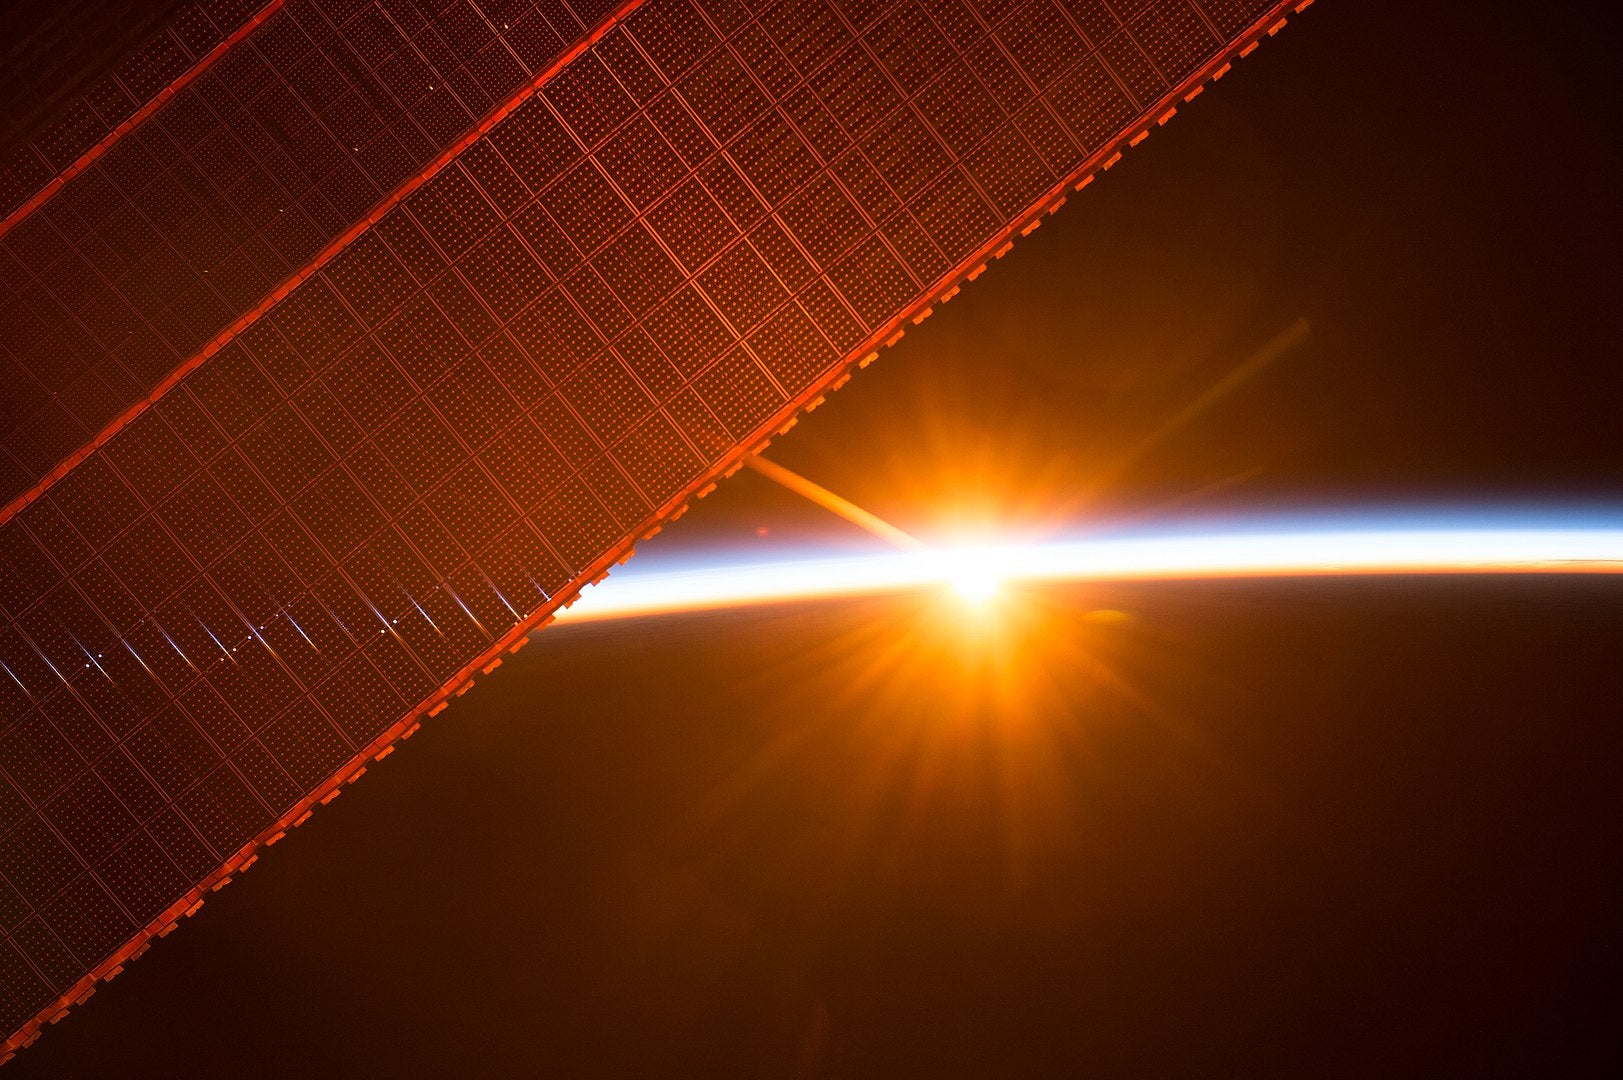 A space-based solar power station in orbit would catch the sun’s rays 24 hours a day and so could generate electricity continuously